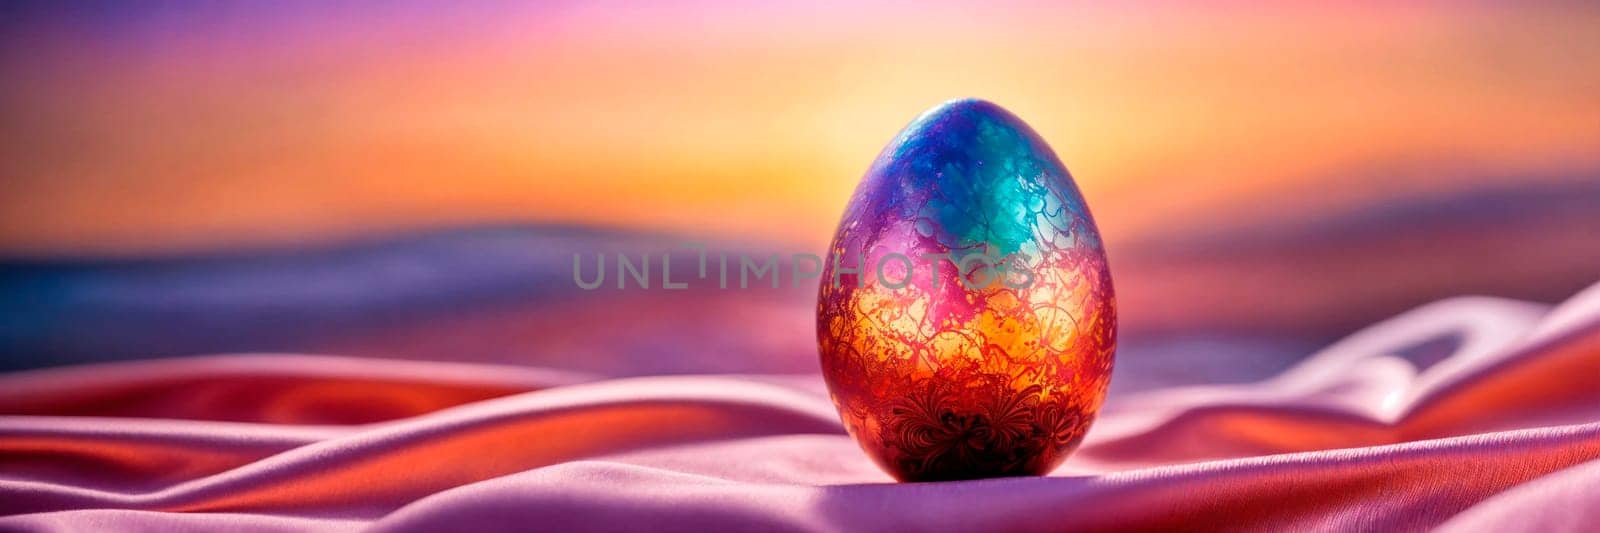 holographic Easter eggs on a shiny background. Selective focus. by yanadjana